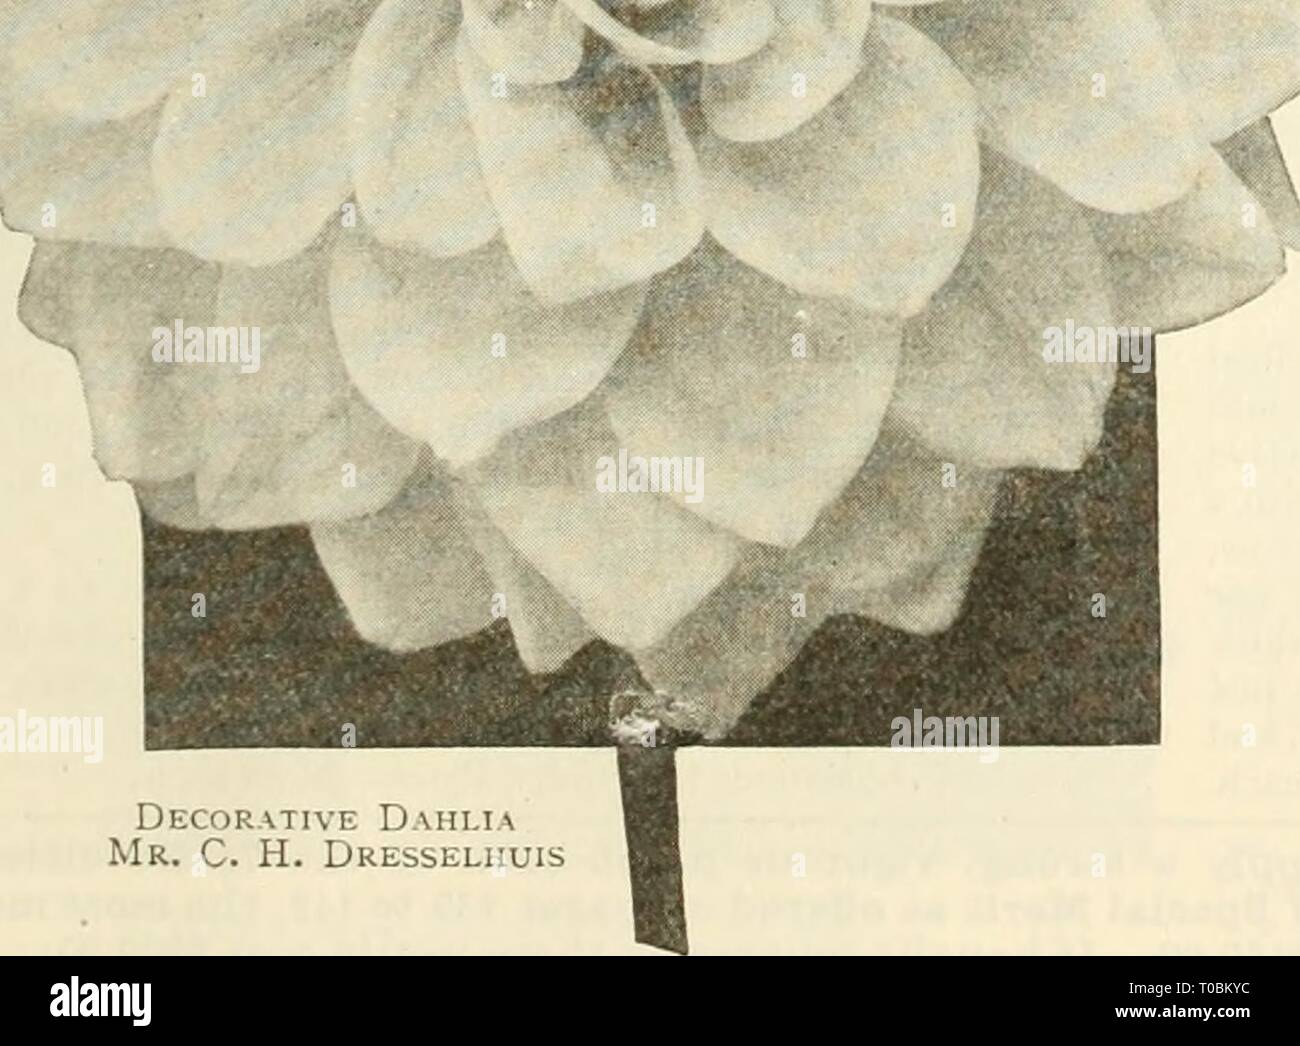 Dreer's garden book 1925 (1925) Dreer's garden book 1925 dreersgardenbook1925henr Year: 1925  Decorative D.hi.ia Mr. C. H. Dresseluuis CaCtus Dahlia. El Granada (Offered on page 139) Mme. Butterfly {Paeonie). Ground color yellow, heavily shaded with coral-red; a gay-colored flower, very freely produced. Plants, $1.50 each. Mrs. O. D. Baldwin {Decorative). A good sized flower on long stiff wiry stems, fine for cutting, the base of the flower is not unlike the color of the American Beauty Rose, a rich rosy-carmine, suffused with, and shading to soft rose-pink at the tips. Plants, $1.50 each. Mr Stock Photo